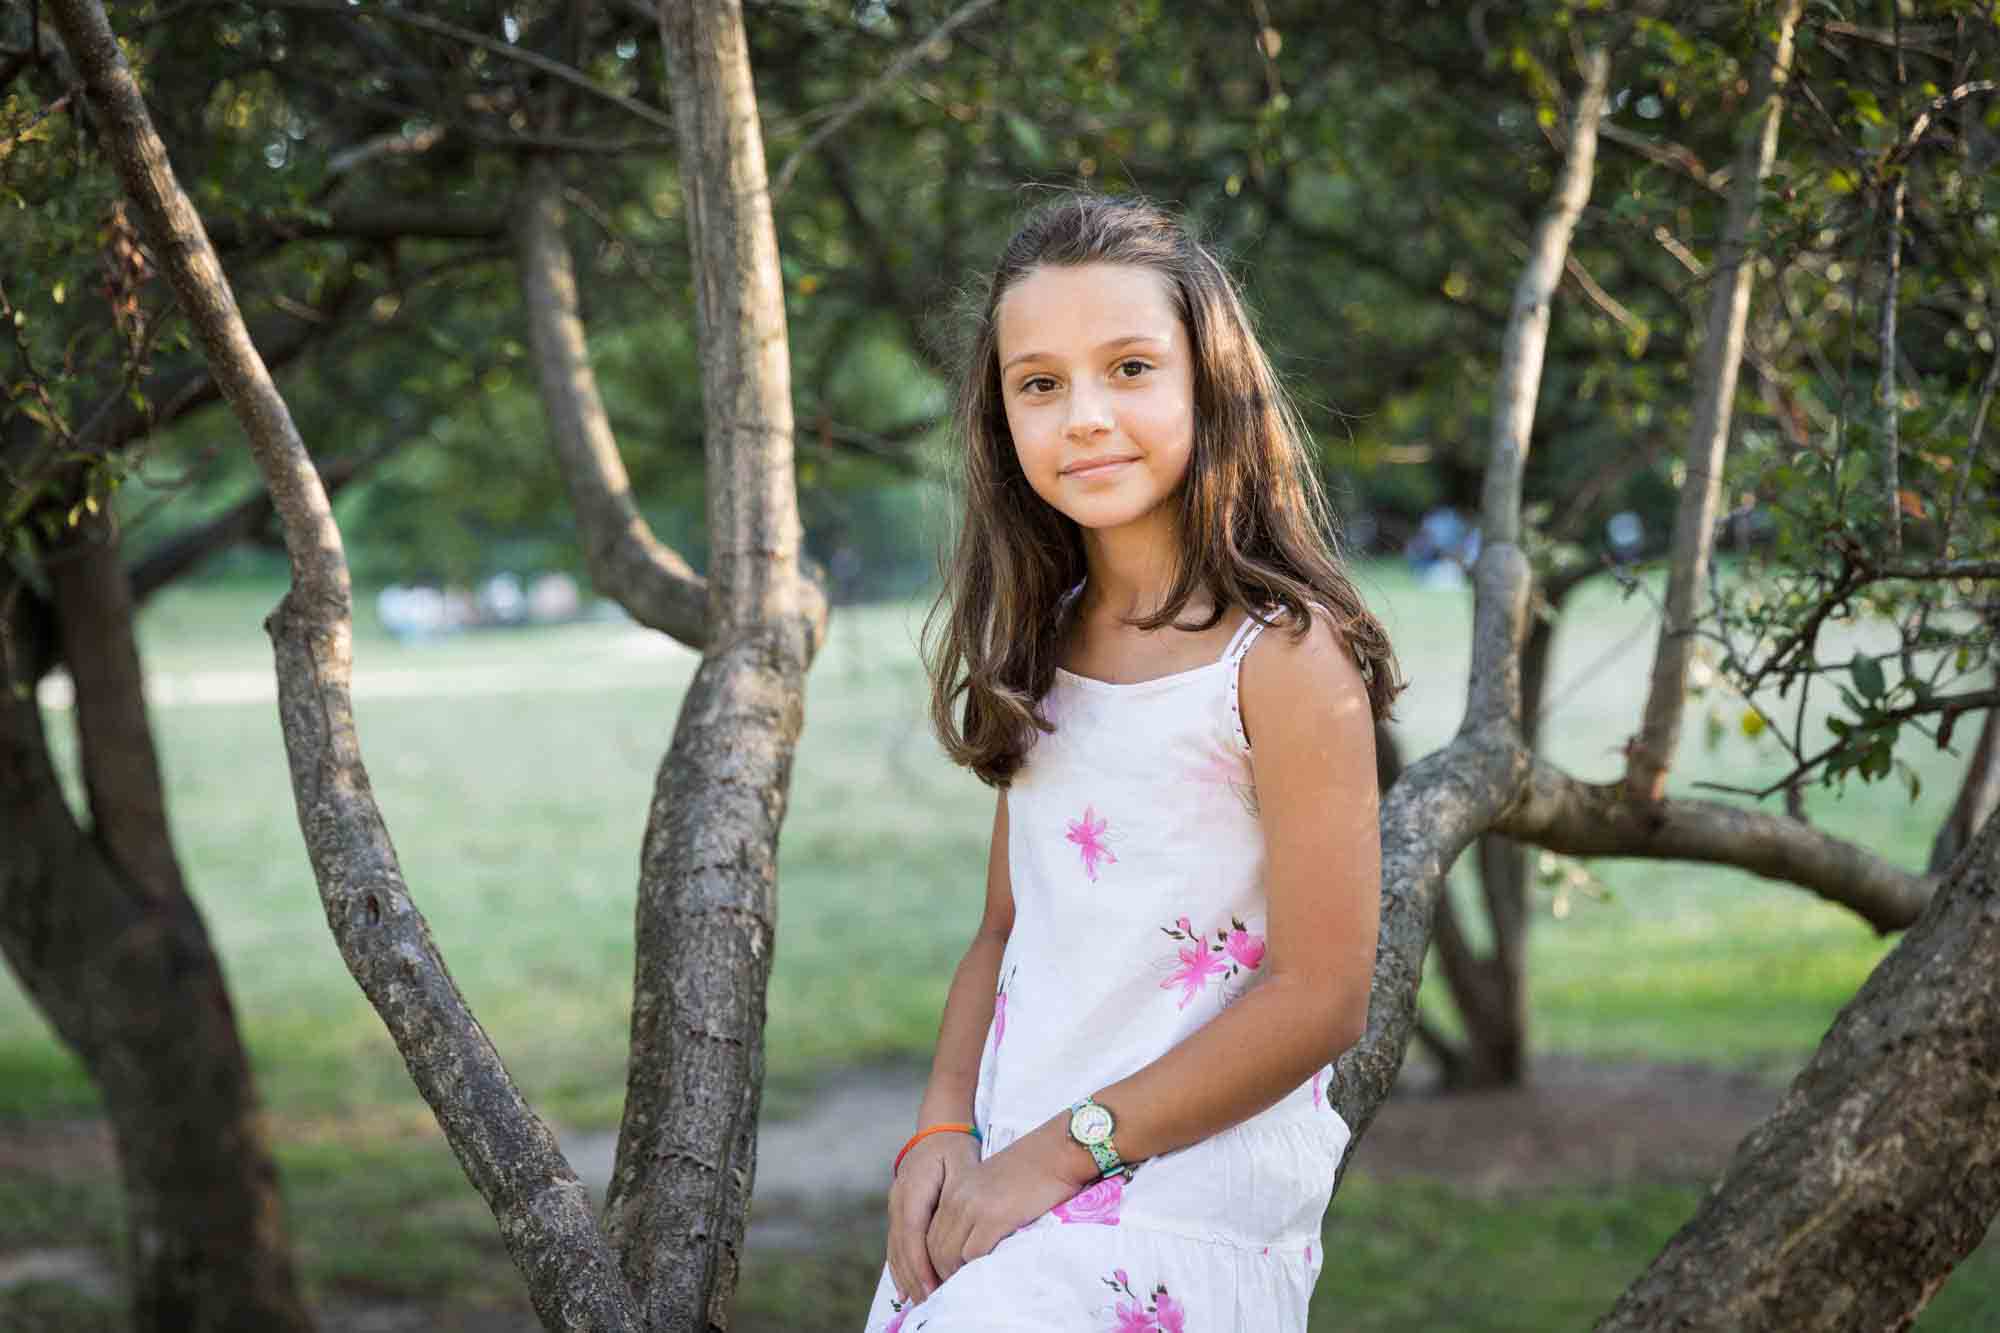 Young girl sitting in a tree during a Forest Park family photo shoot